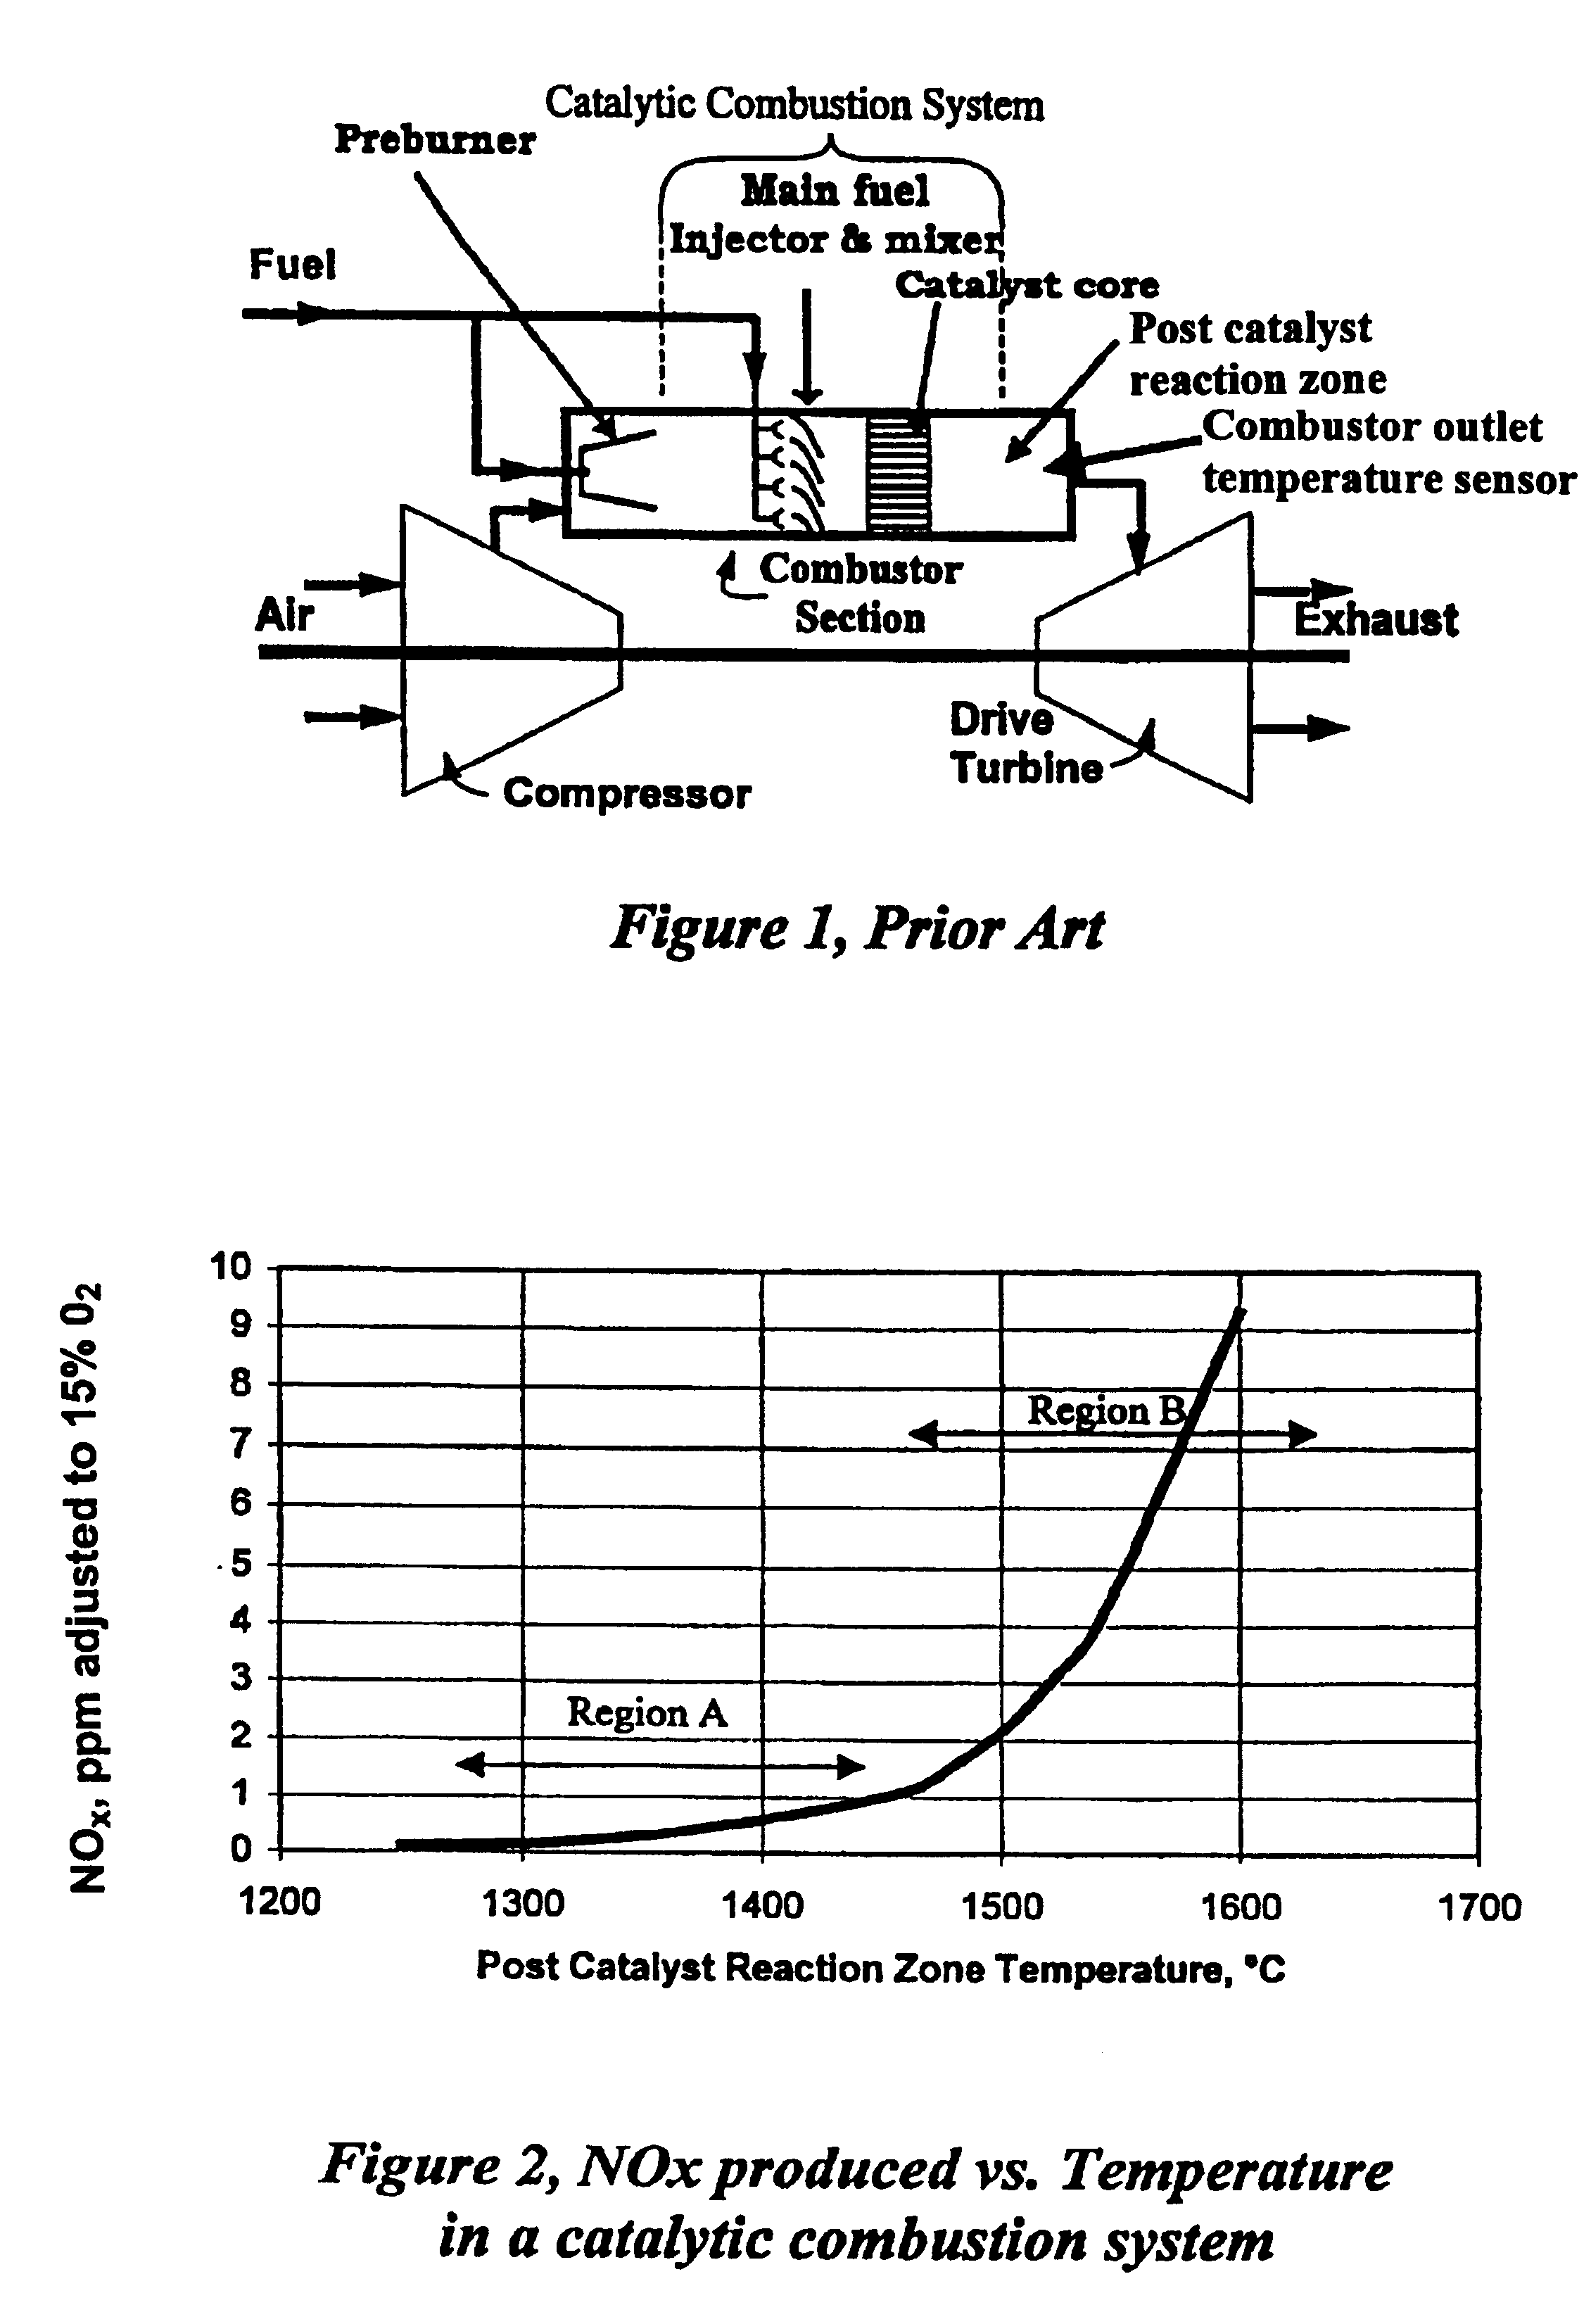 Method of thermal NOx reduction in catalytic combustion systems